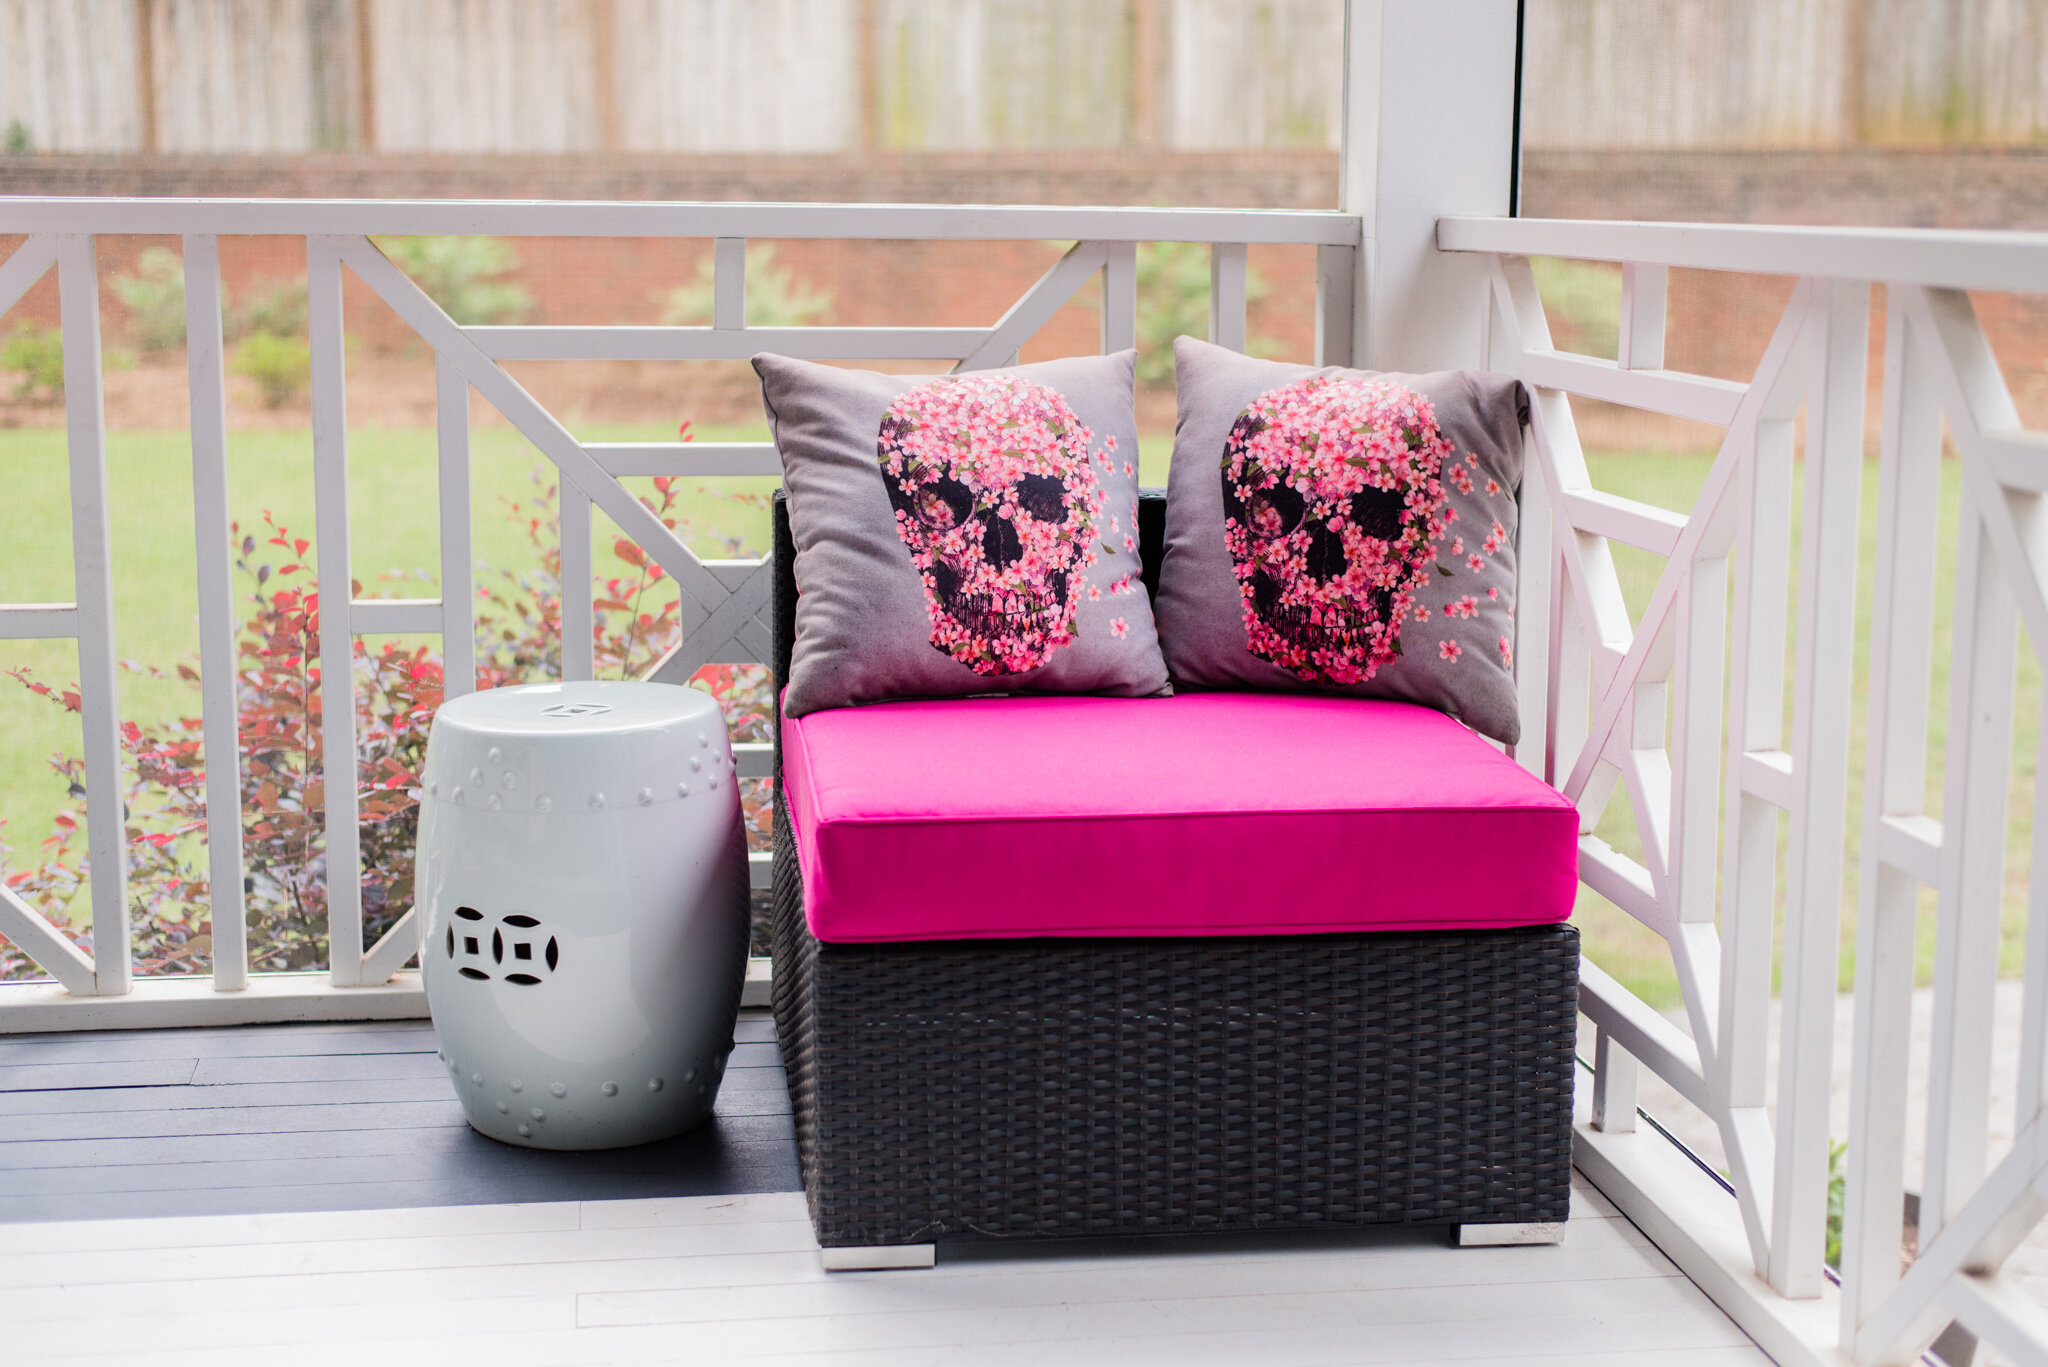 Dwell-Chic-Contemporary-Vibrant-Outdoor-Porch-Skull-Pillows-Seat.jpg